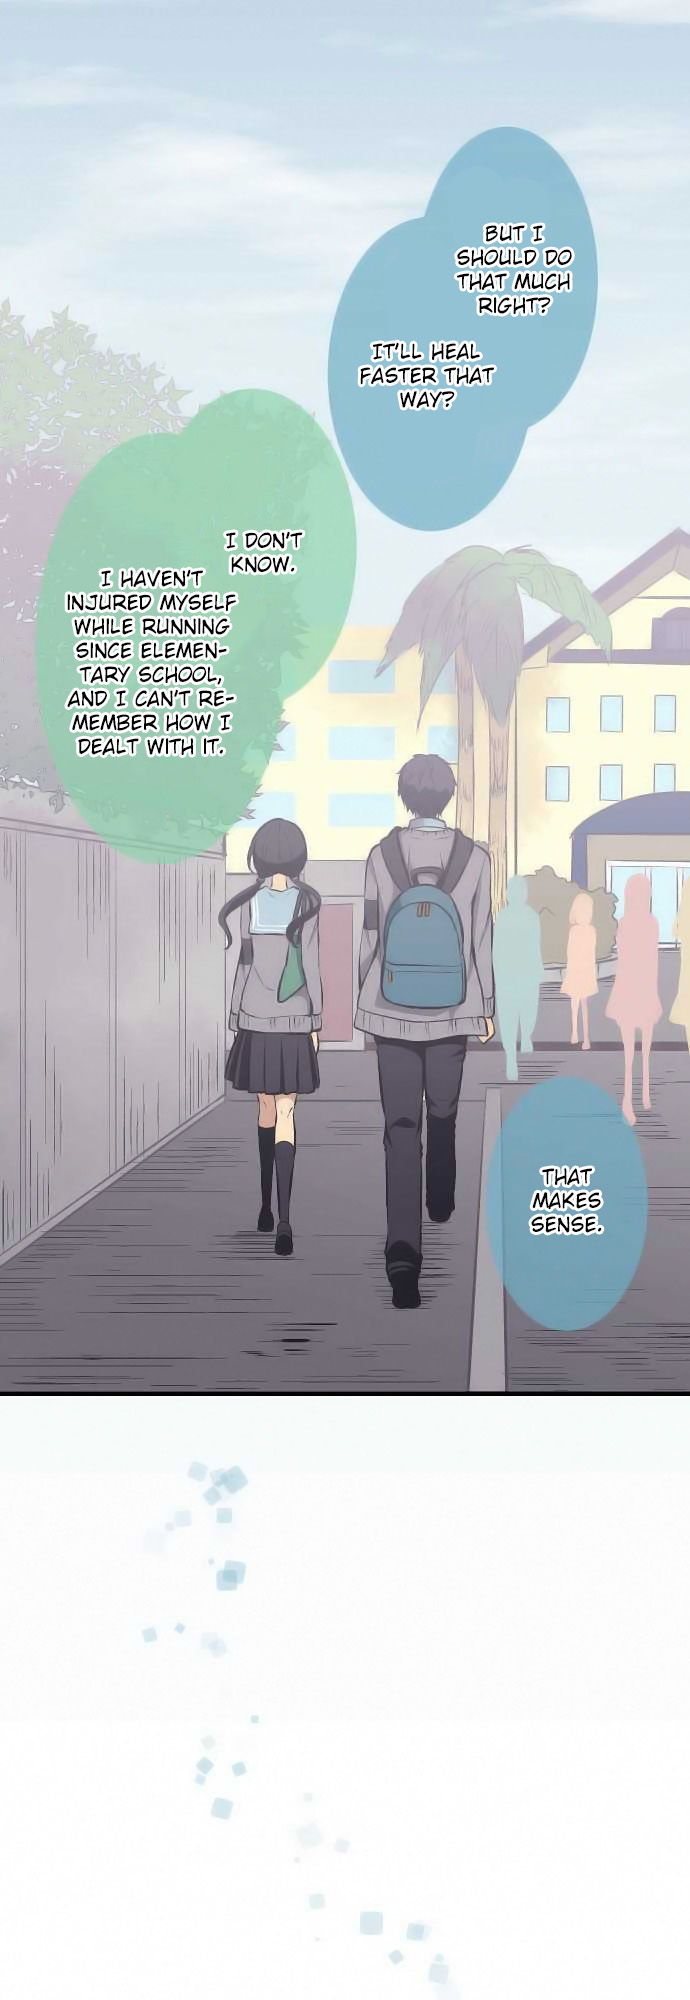 ReLIFE 31